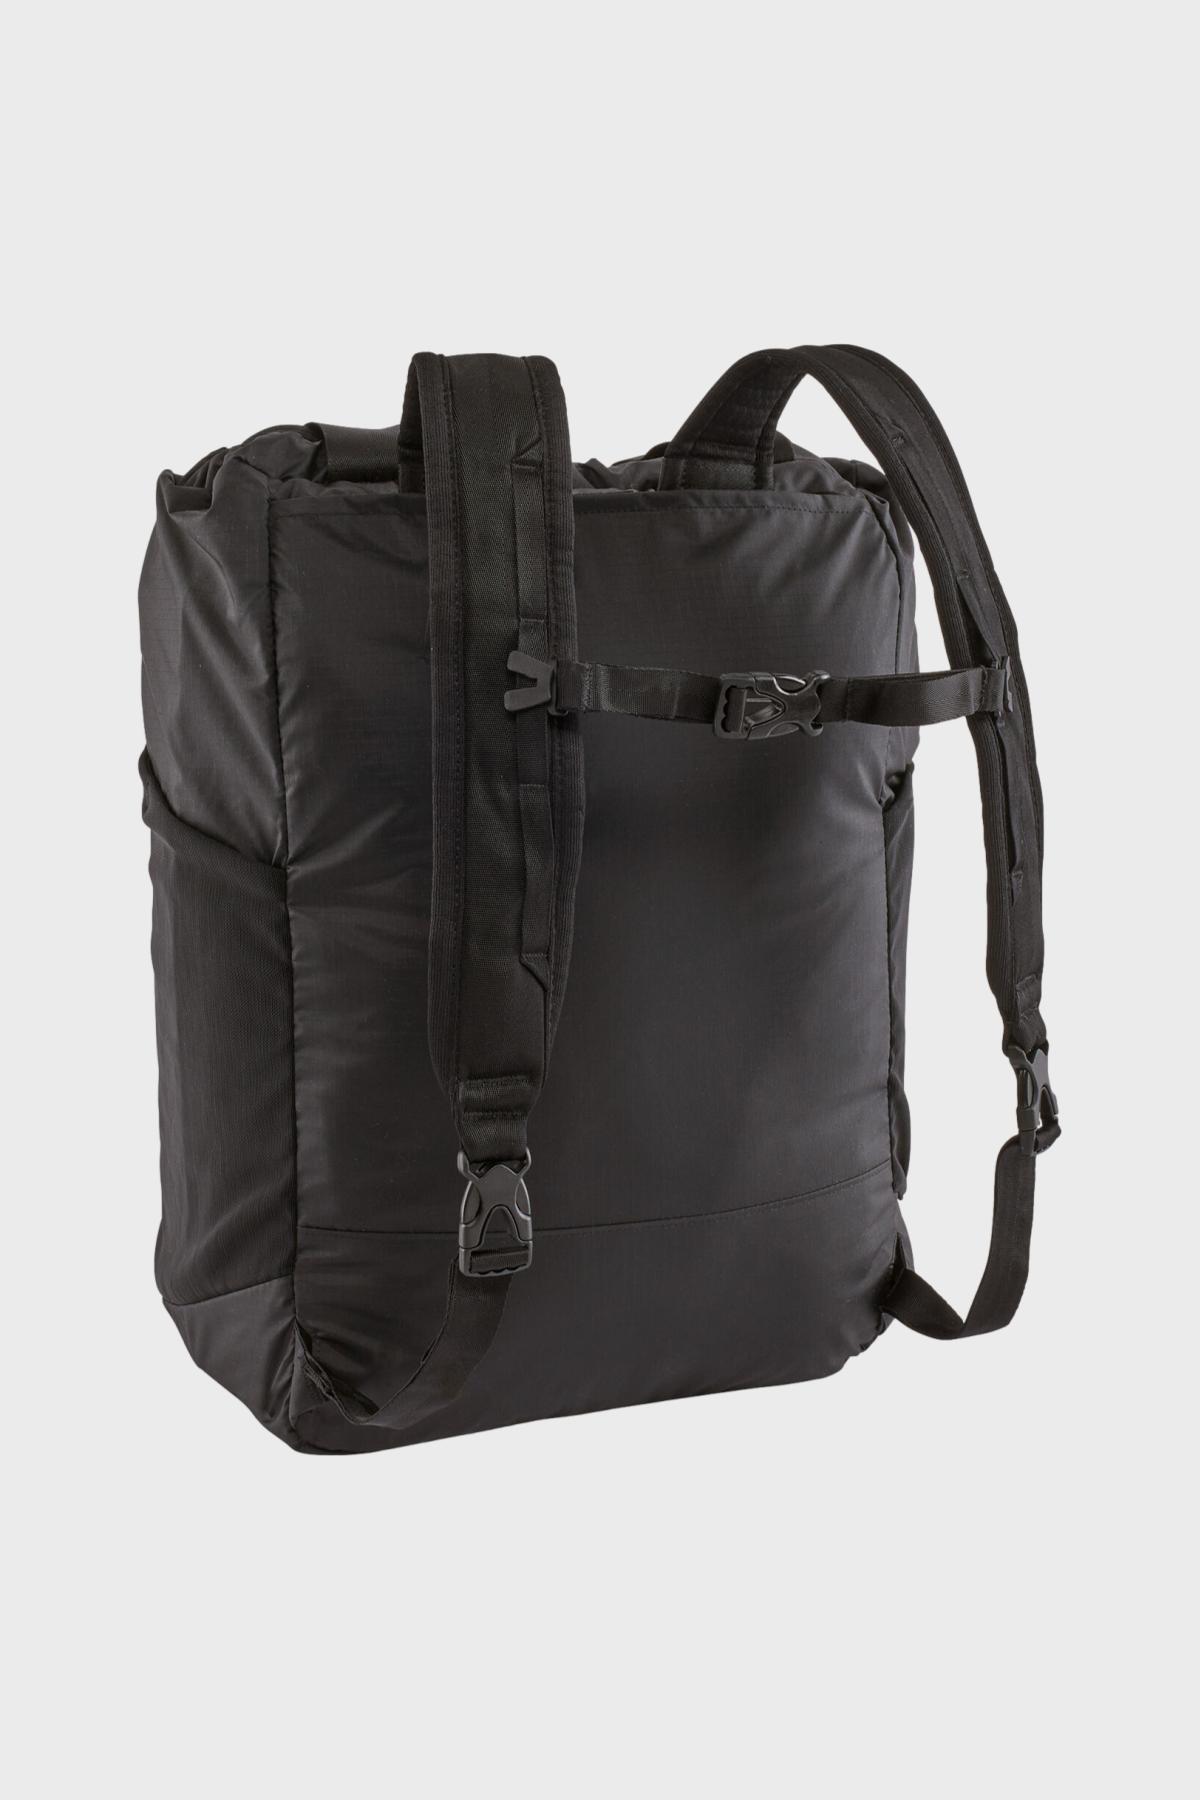 Patagonia - Ultralight Black Hole Tote Pack 27L